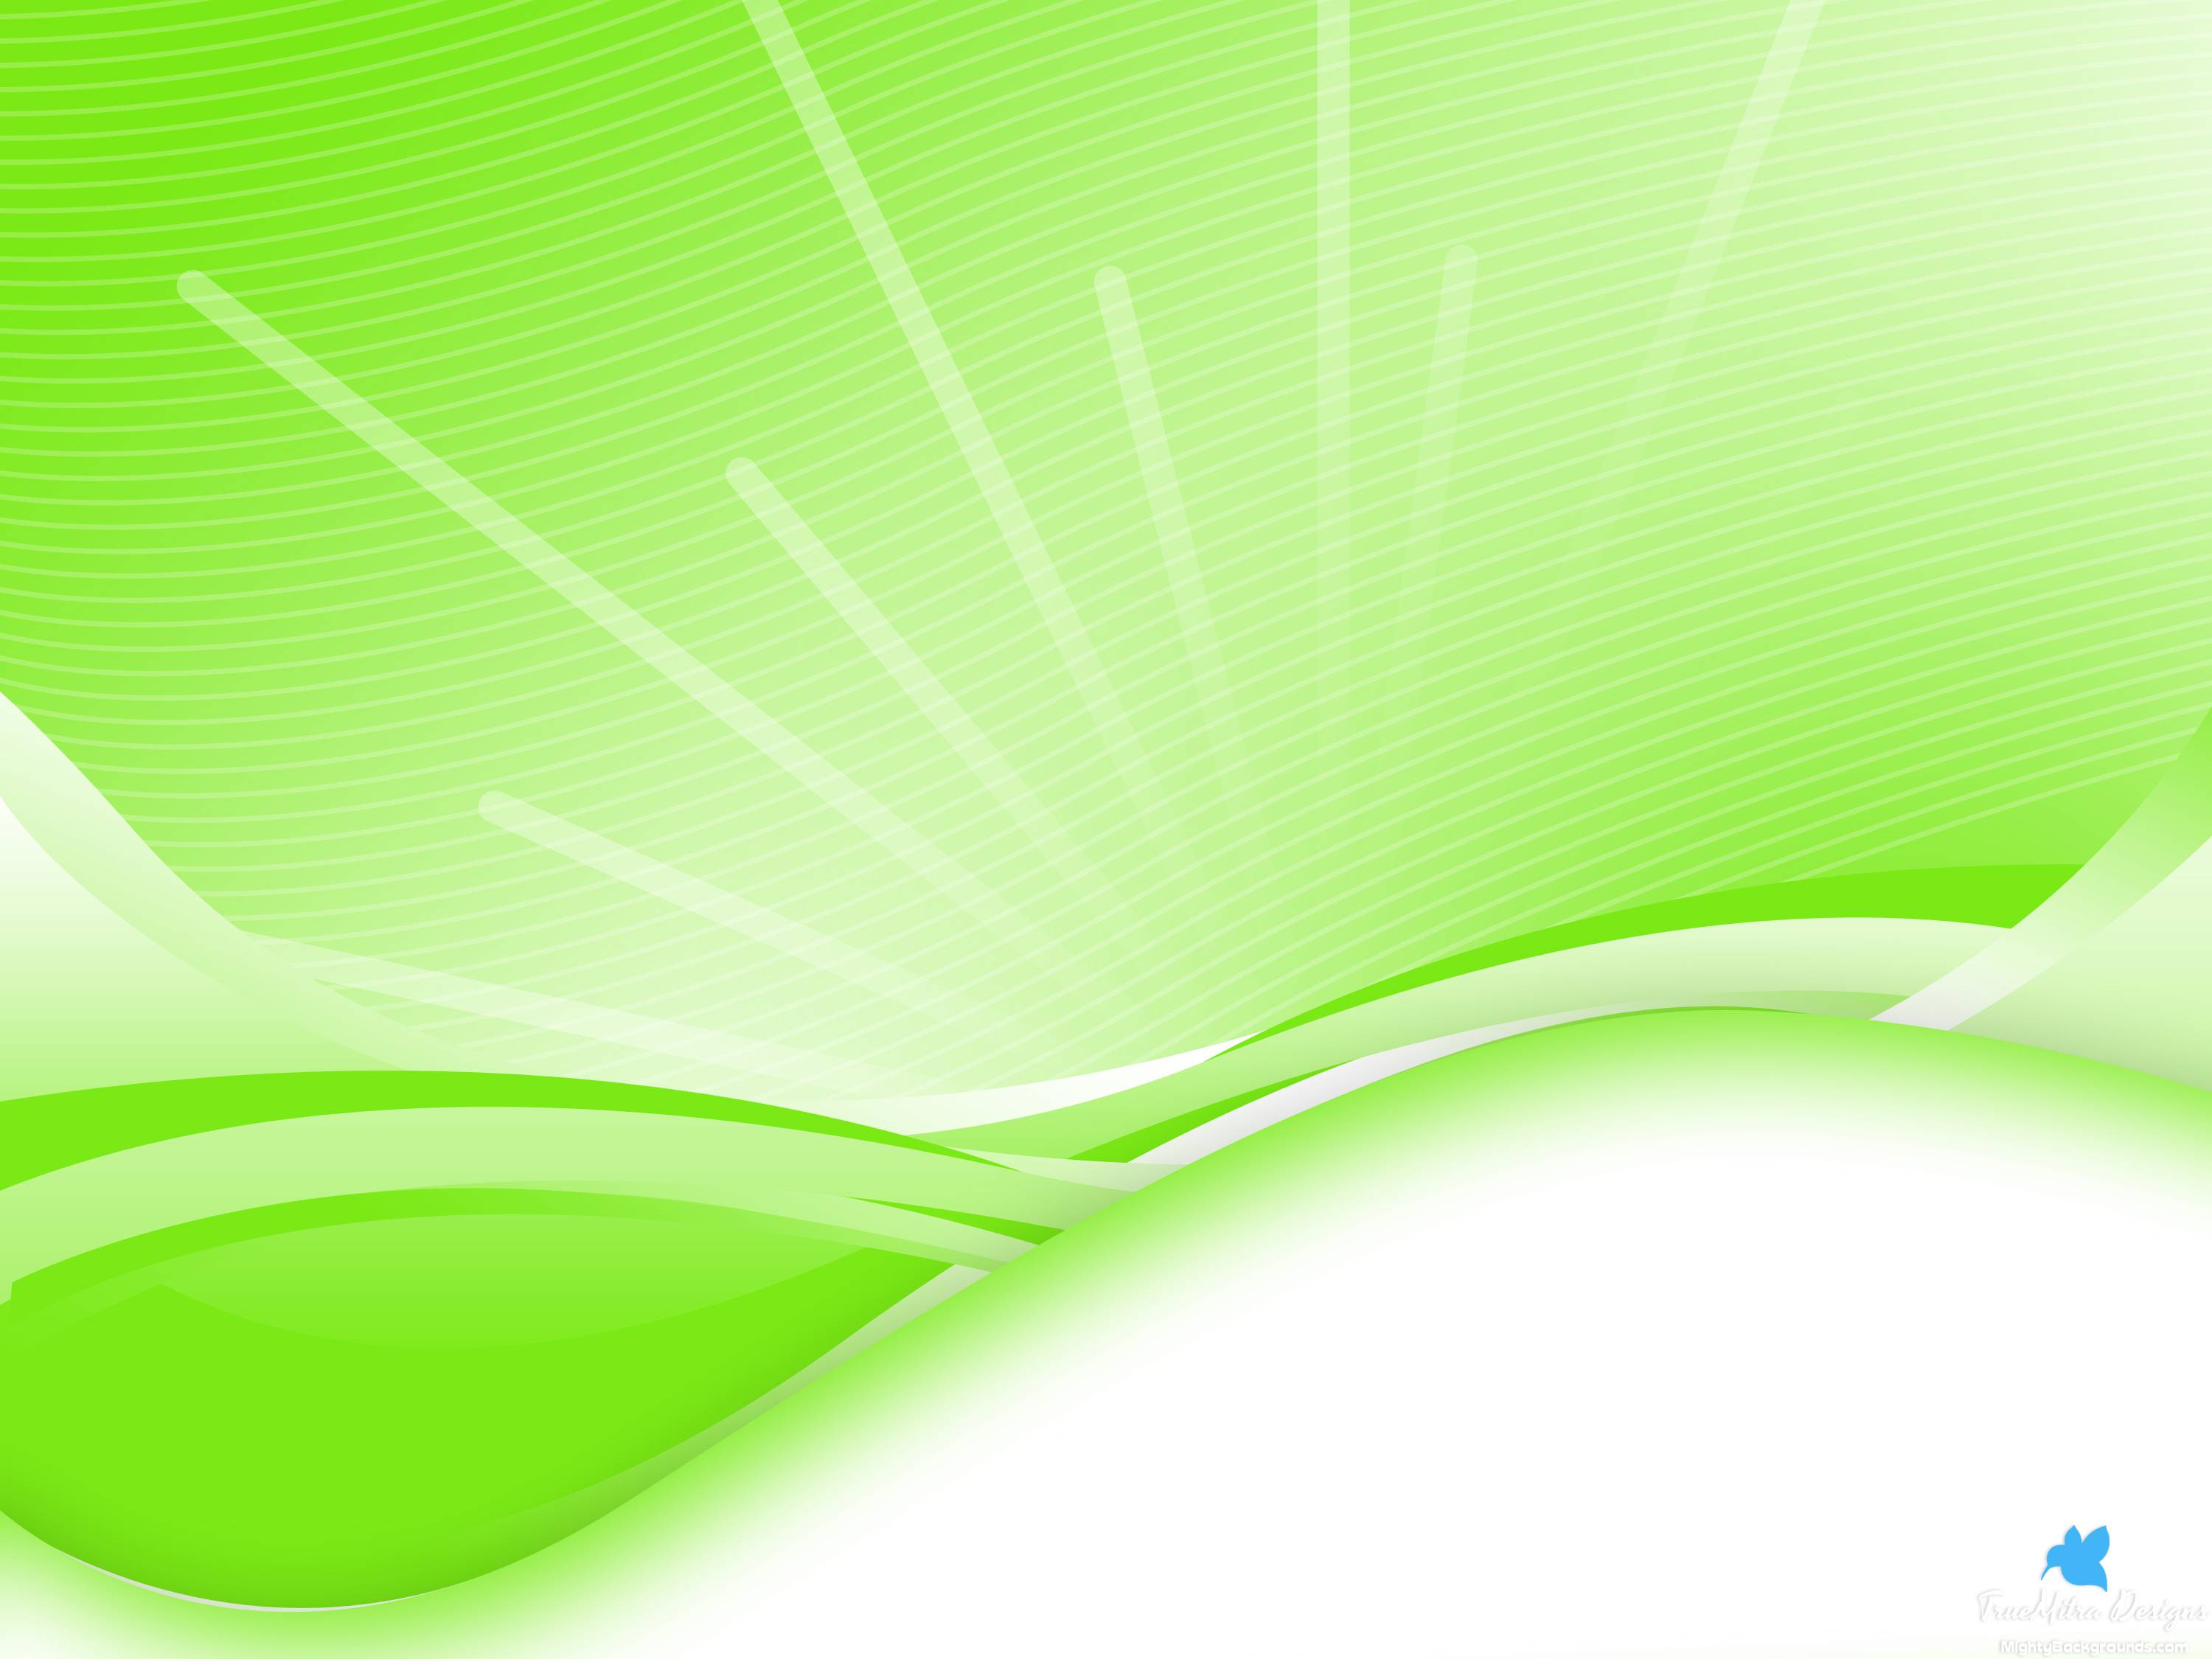 Green Background Images - Wallpaper Cave